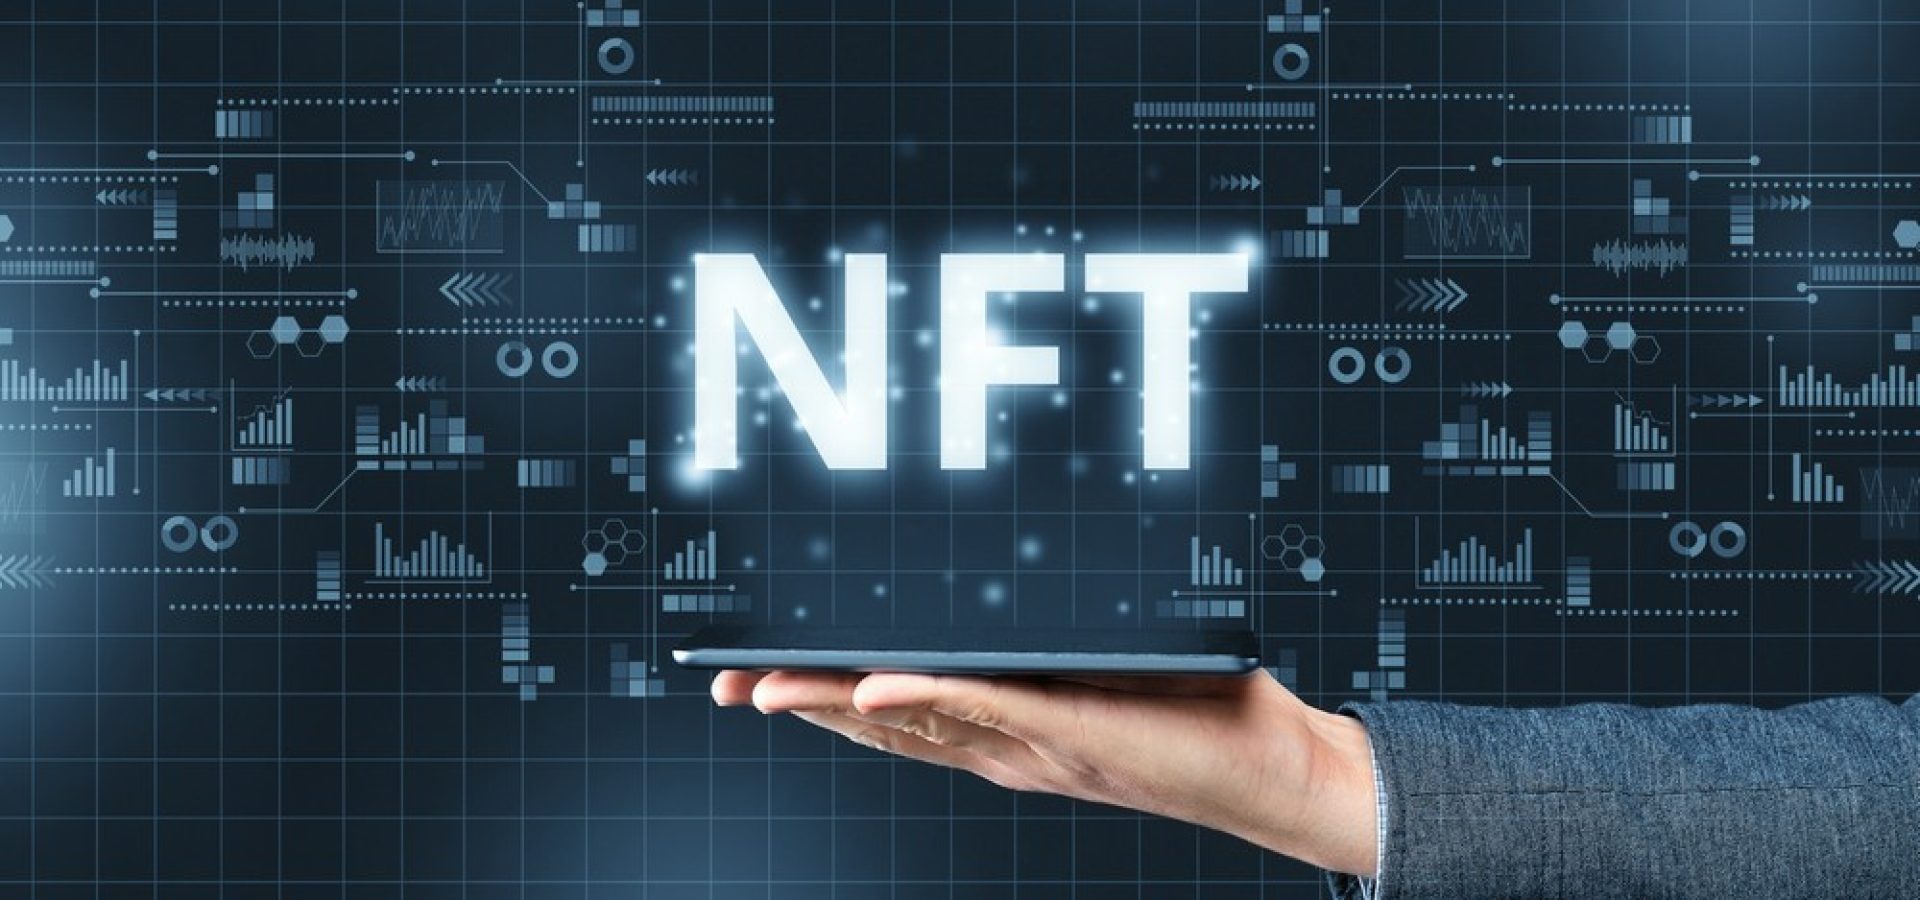 Most Significant NFT Sales and Drops in 2021